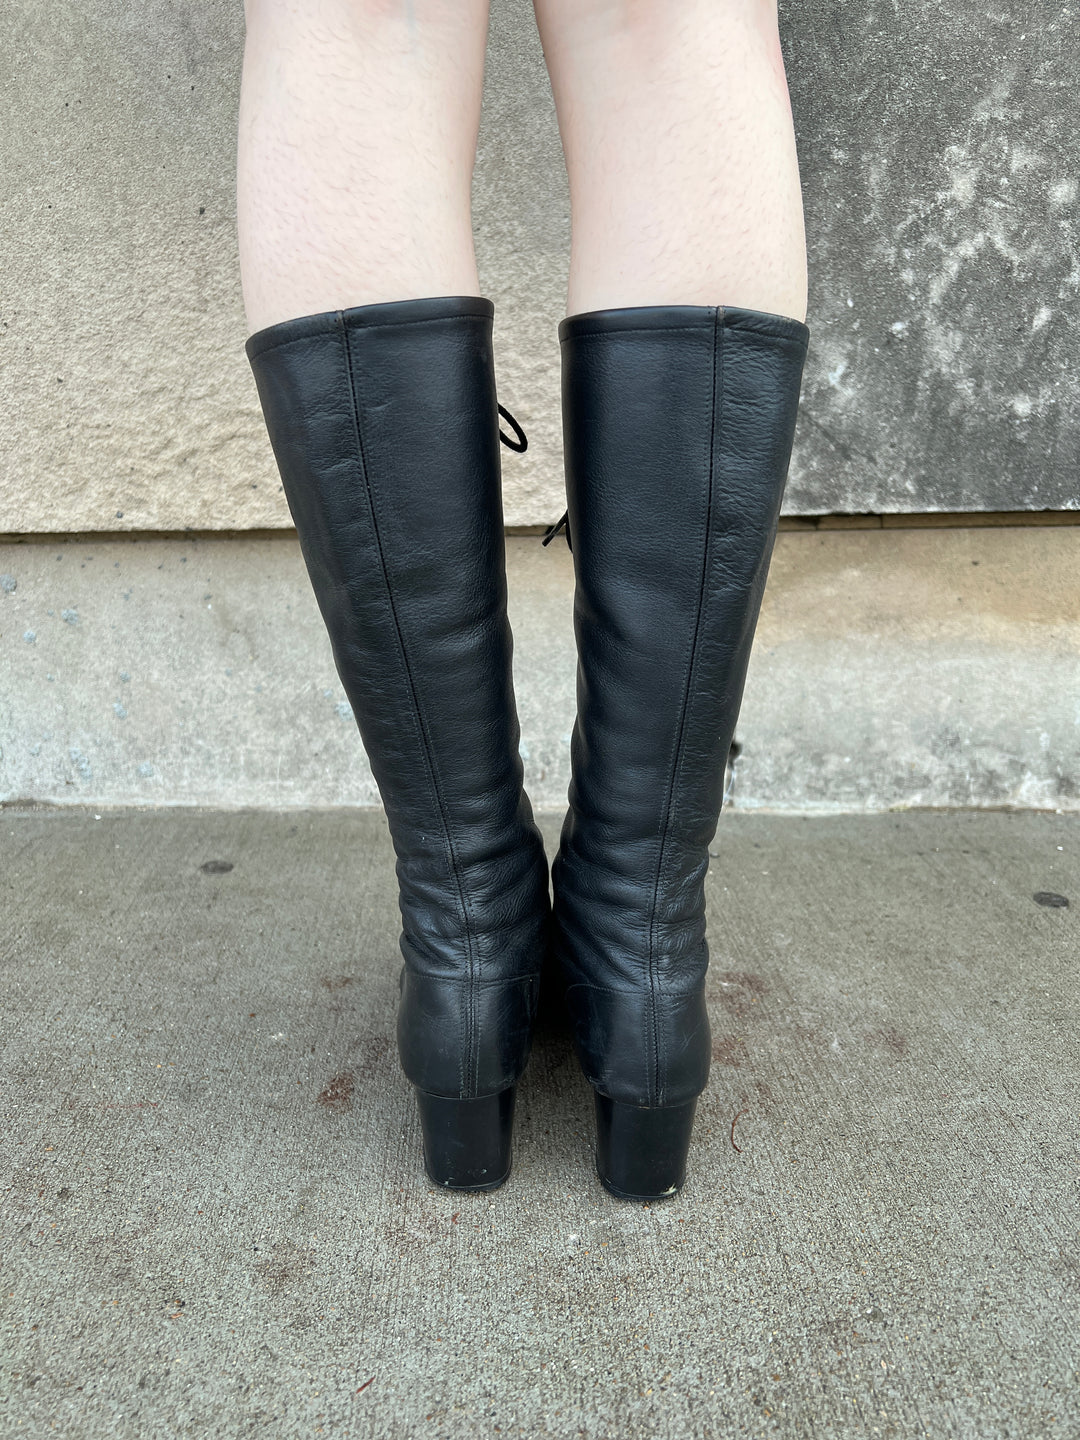 70s Black Leather Lace Up Knee High Boots